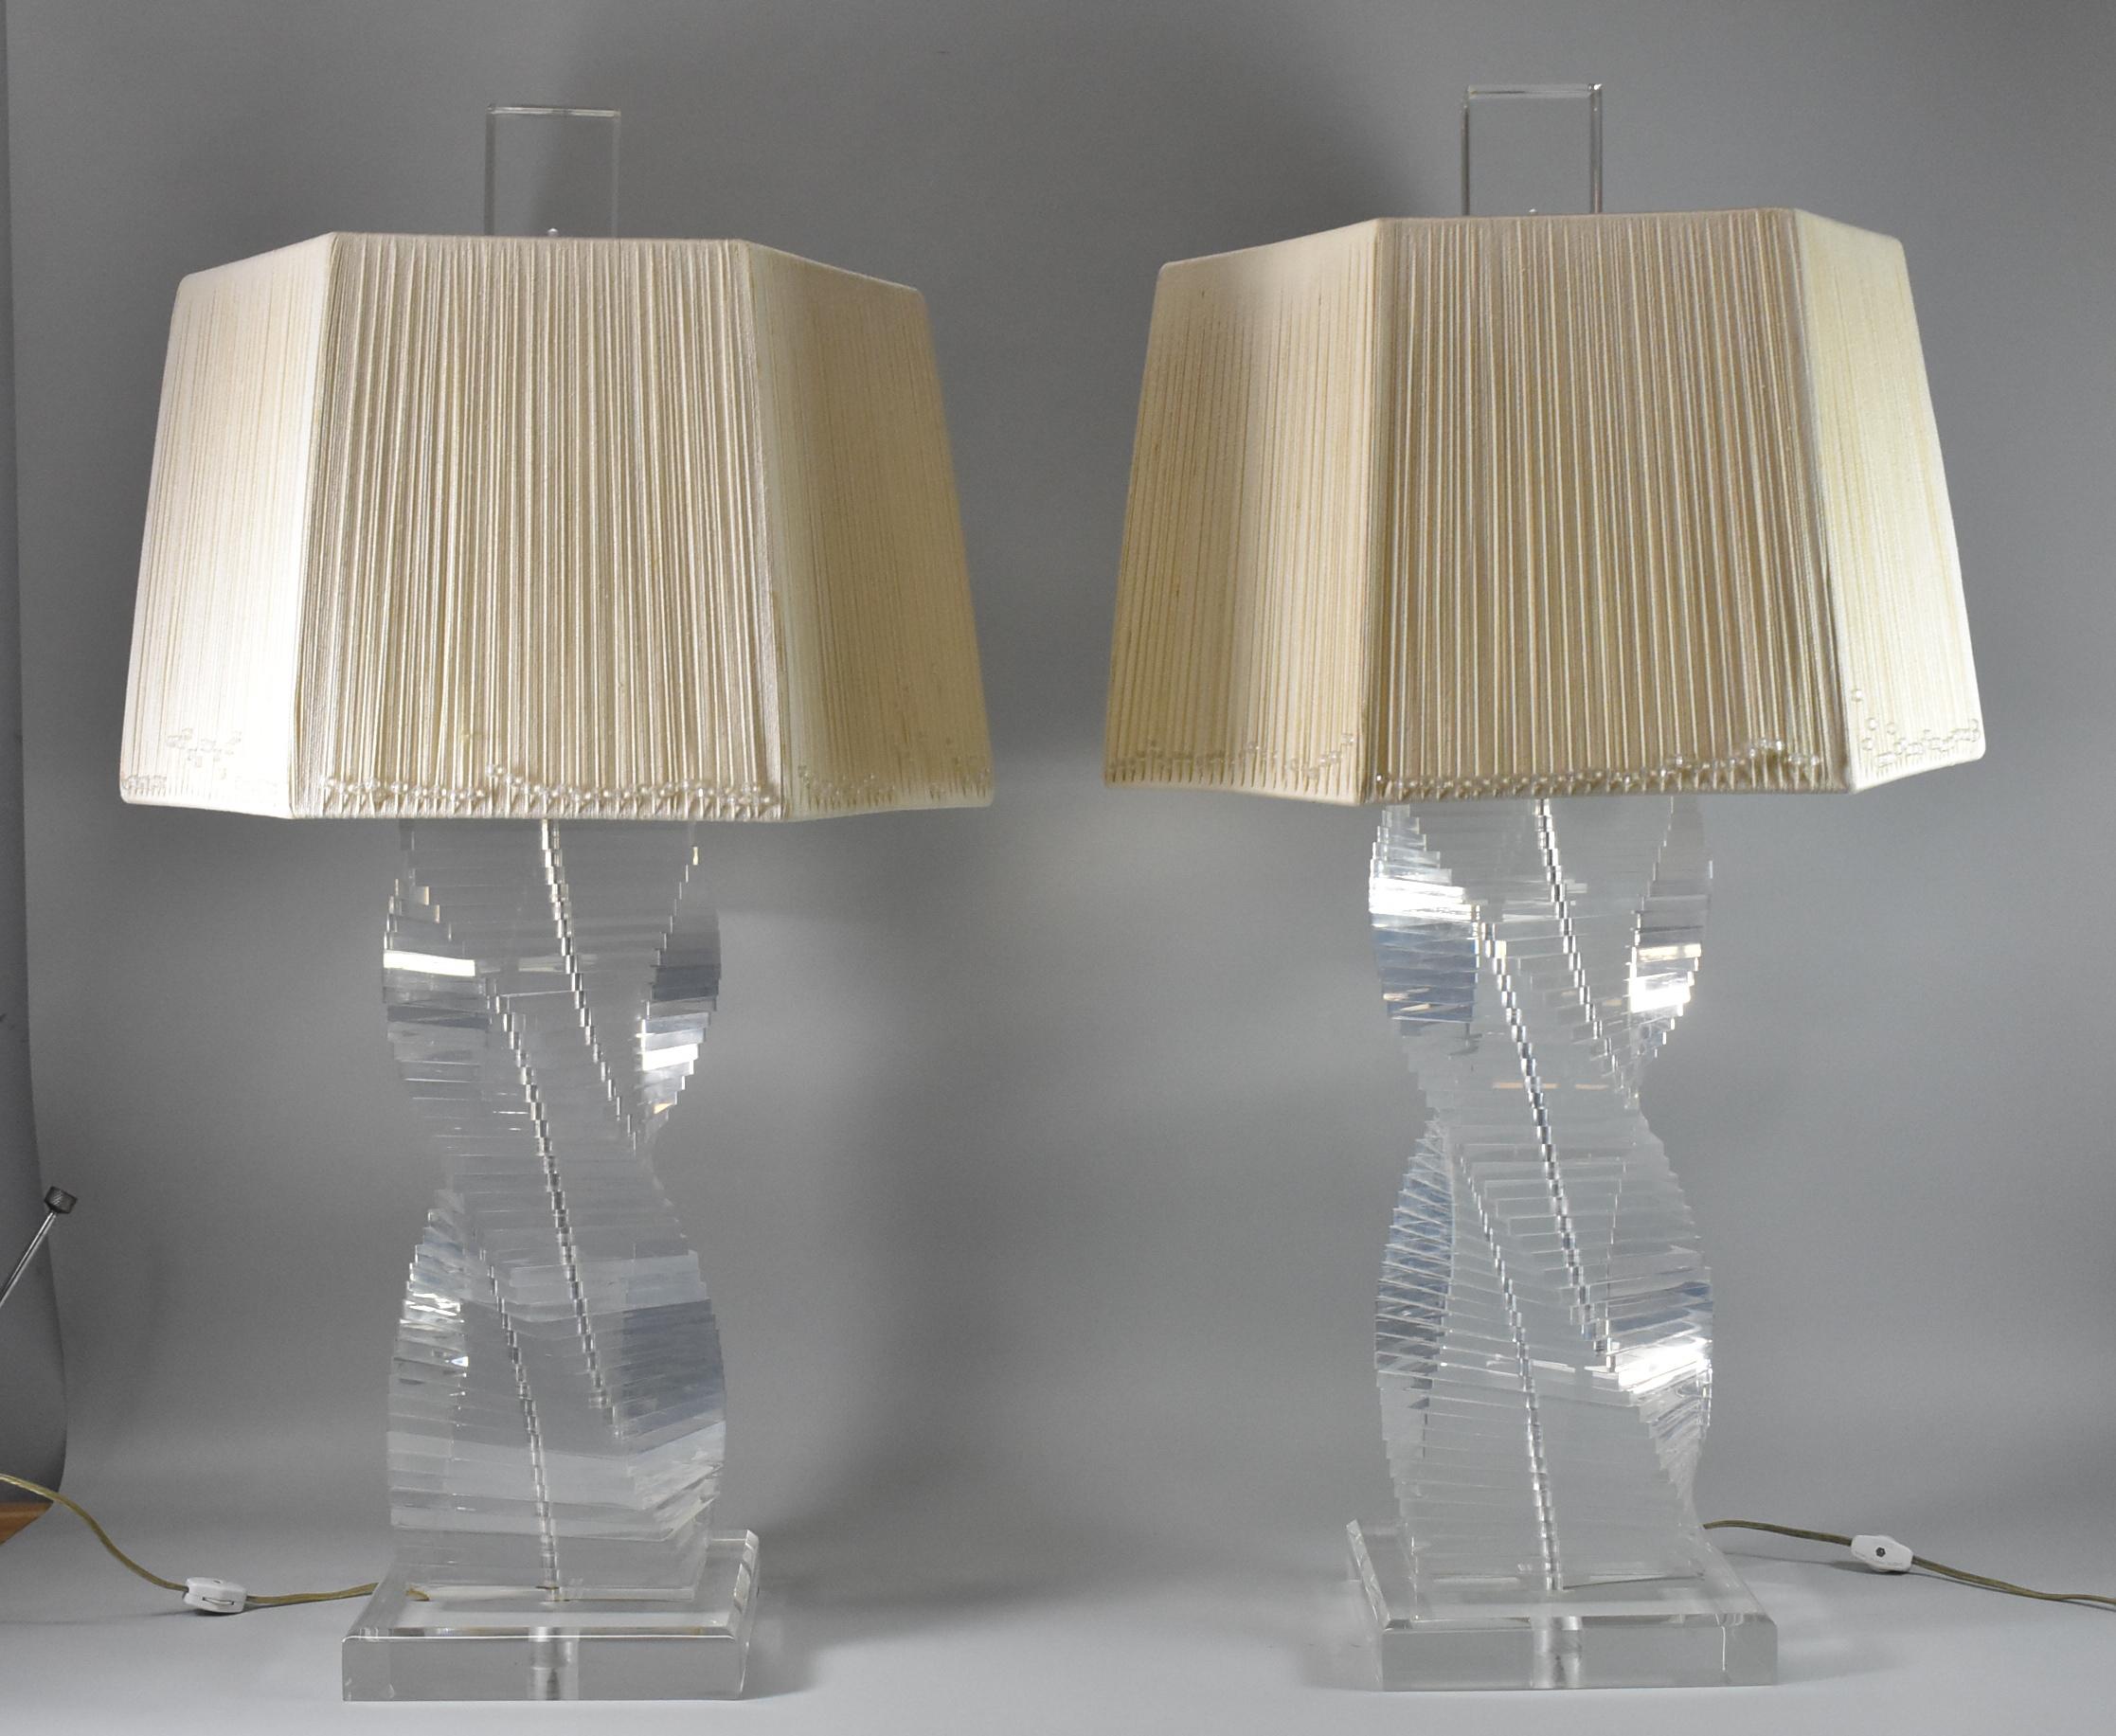 Pair of stacked Lucite helix table lamps with 2 sockets and switch on the cord. The hexagonal string shades are covered with unique beaded slim cords; clear beads slide up and down on the cords. 32